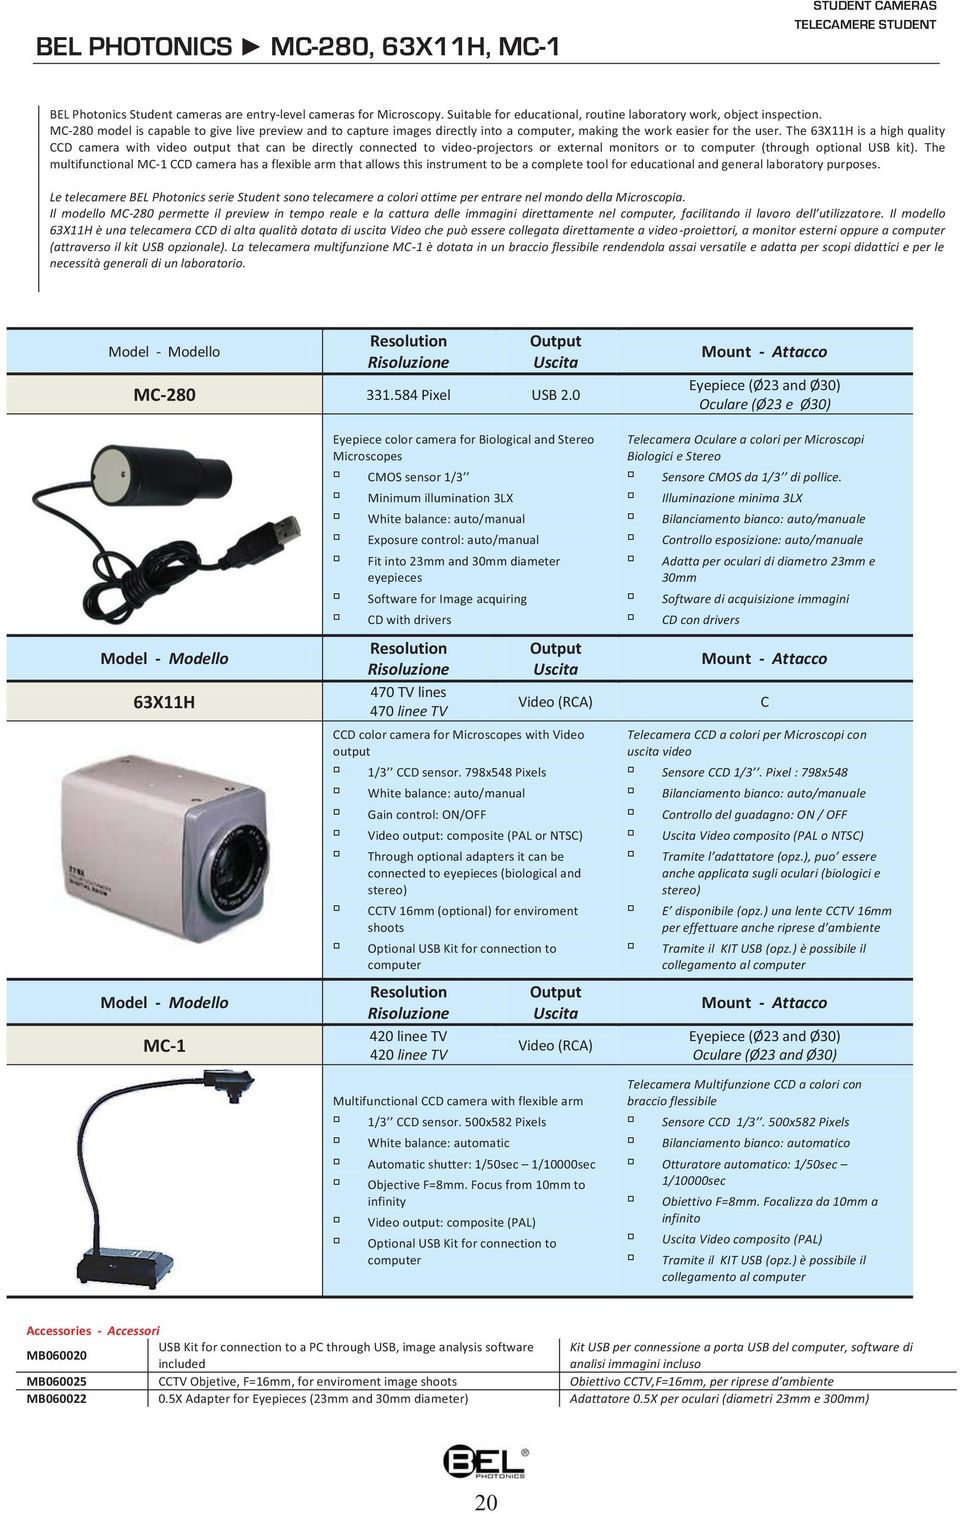 The 63X11H is a high quality CCD camera with video output that can be directly connected to video-projectors or eternal monitors or to computer (through optional USB kit).